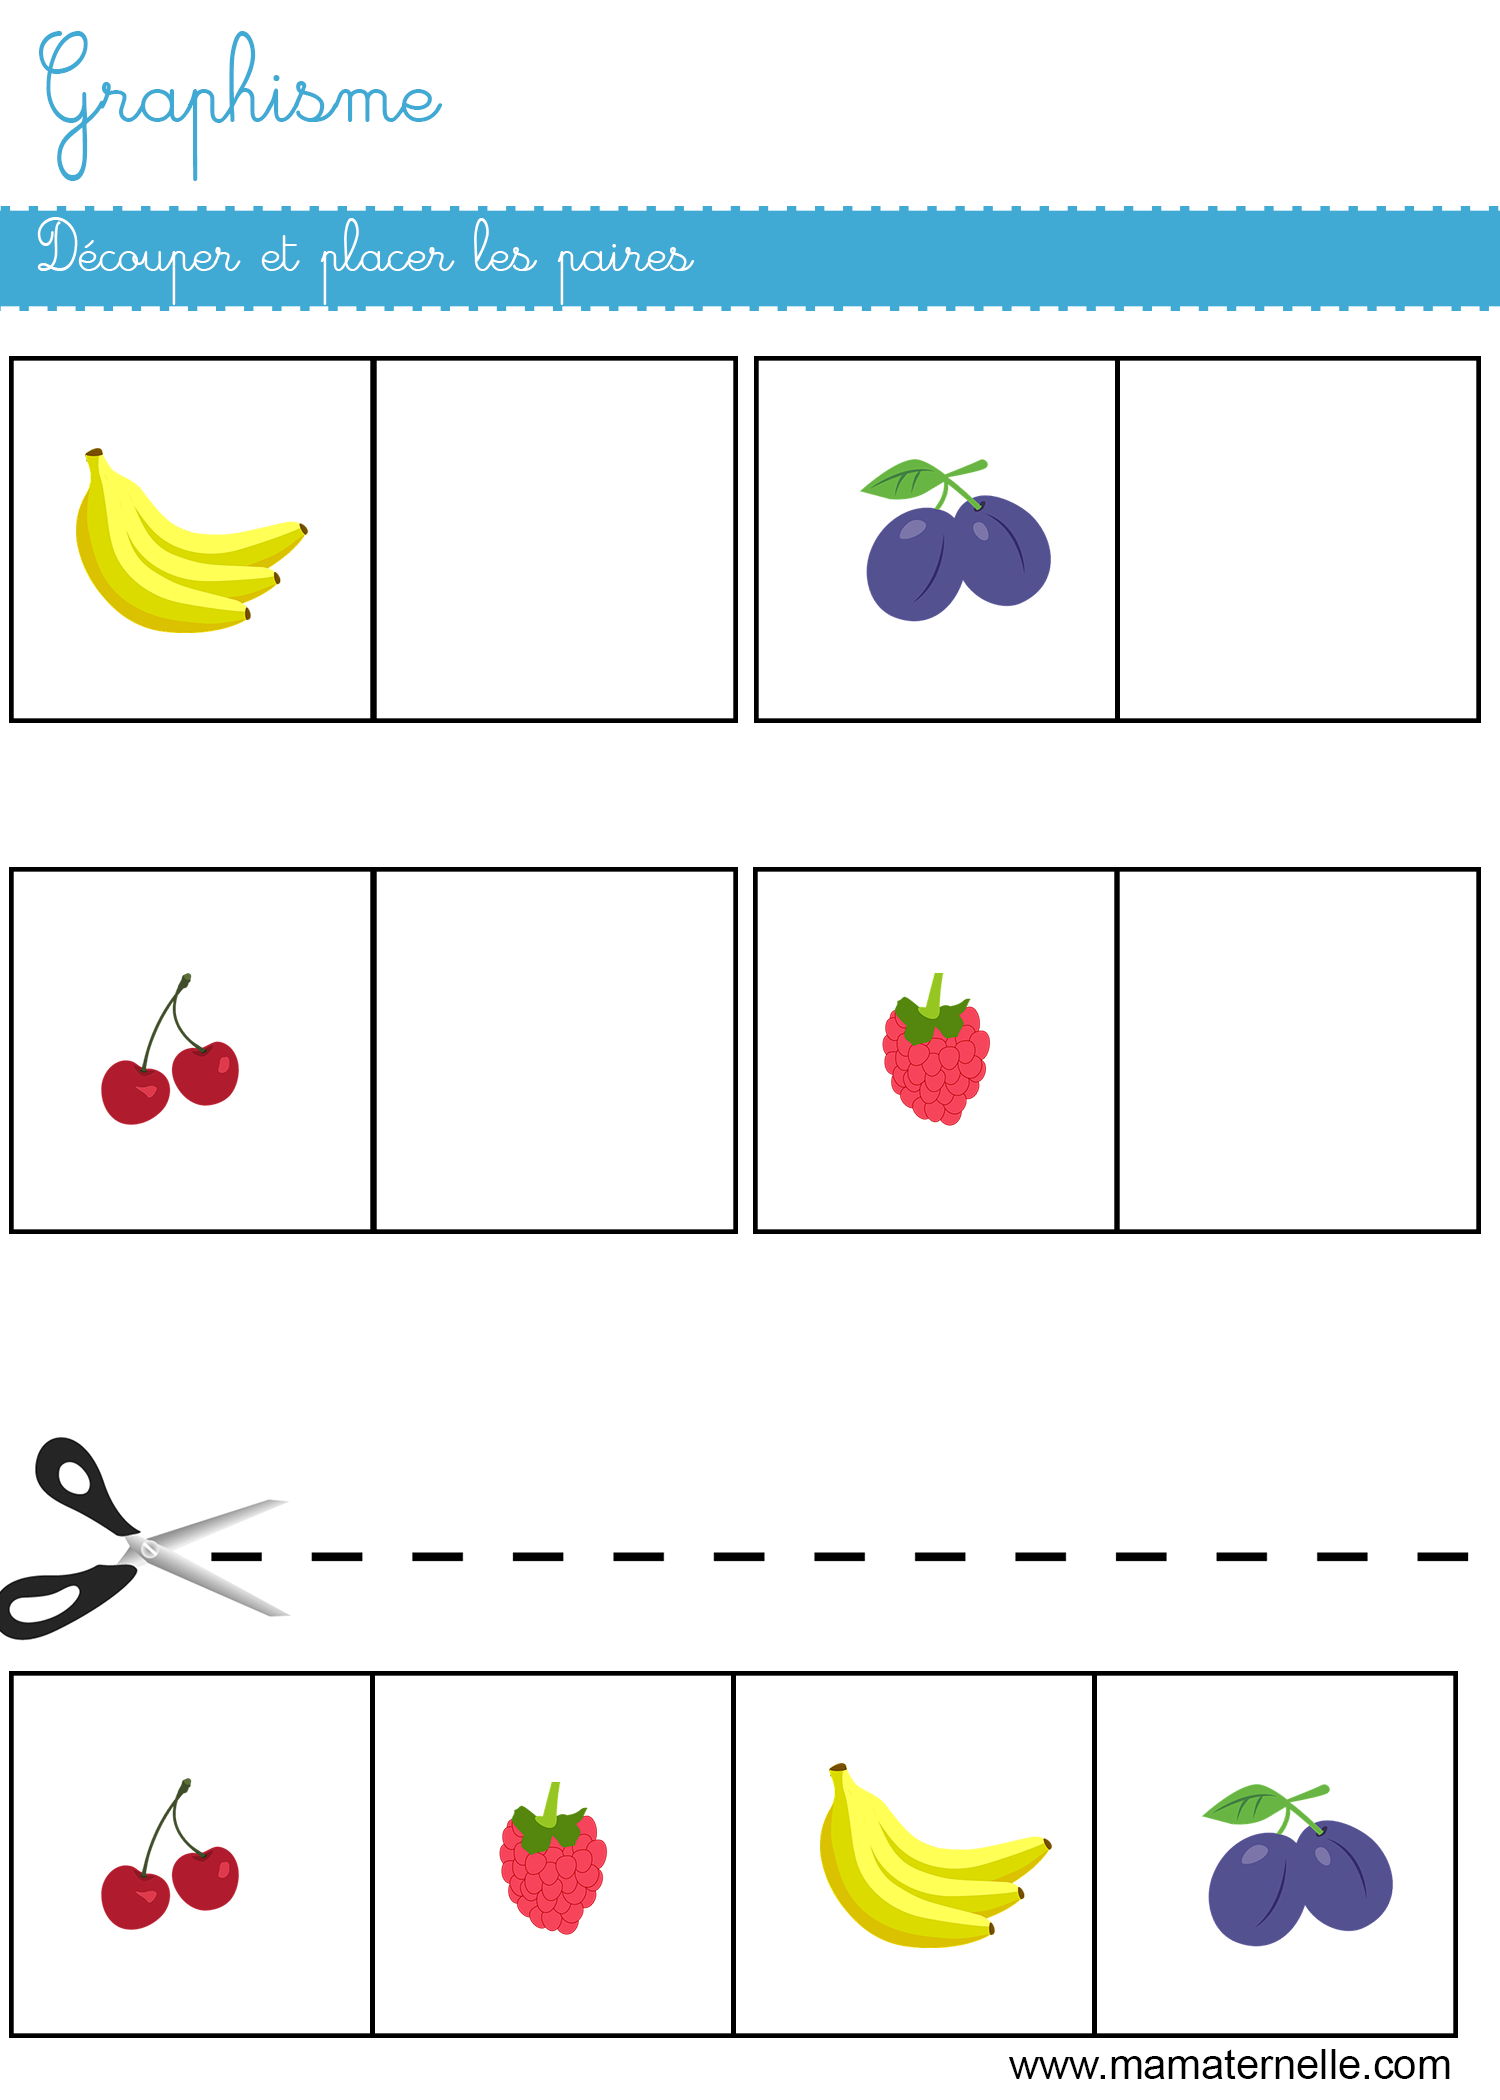 Fiches Graphisme Petite Section Maternelle Tout Exercice Graphisme ...